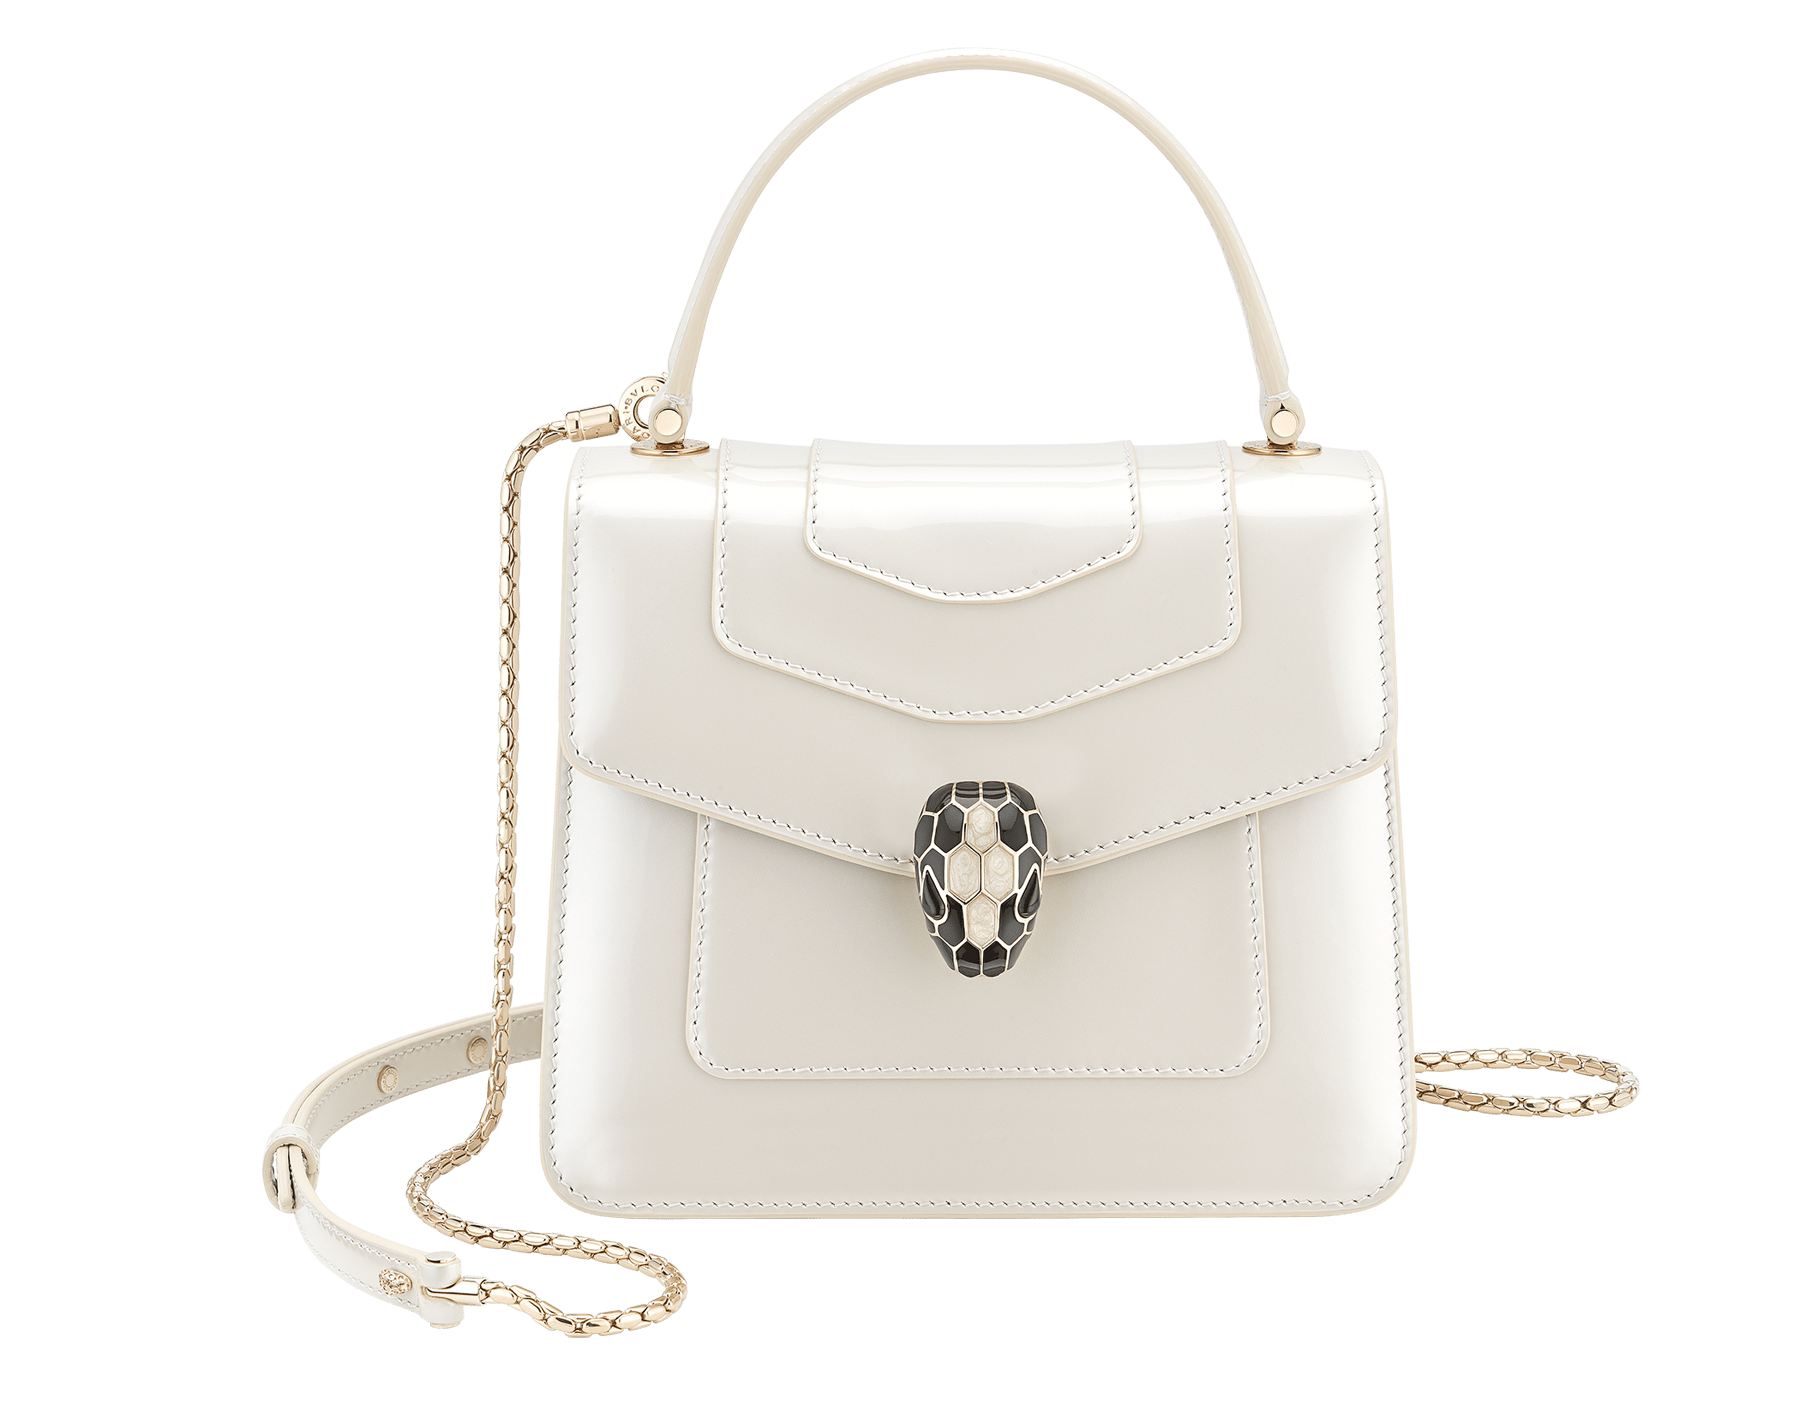 “Serpenti Forever ” top handle bag in white agate calf leather with a varnished and pearled effect, and black gros grain internal lining. Tempting snakehead closure in light gold plated brass enriched with black and pearled white agate enamel and black onyx eyes 1122-VCL image 1